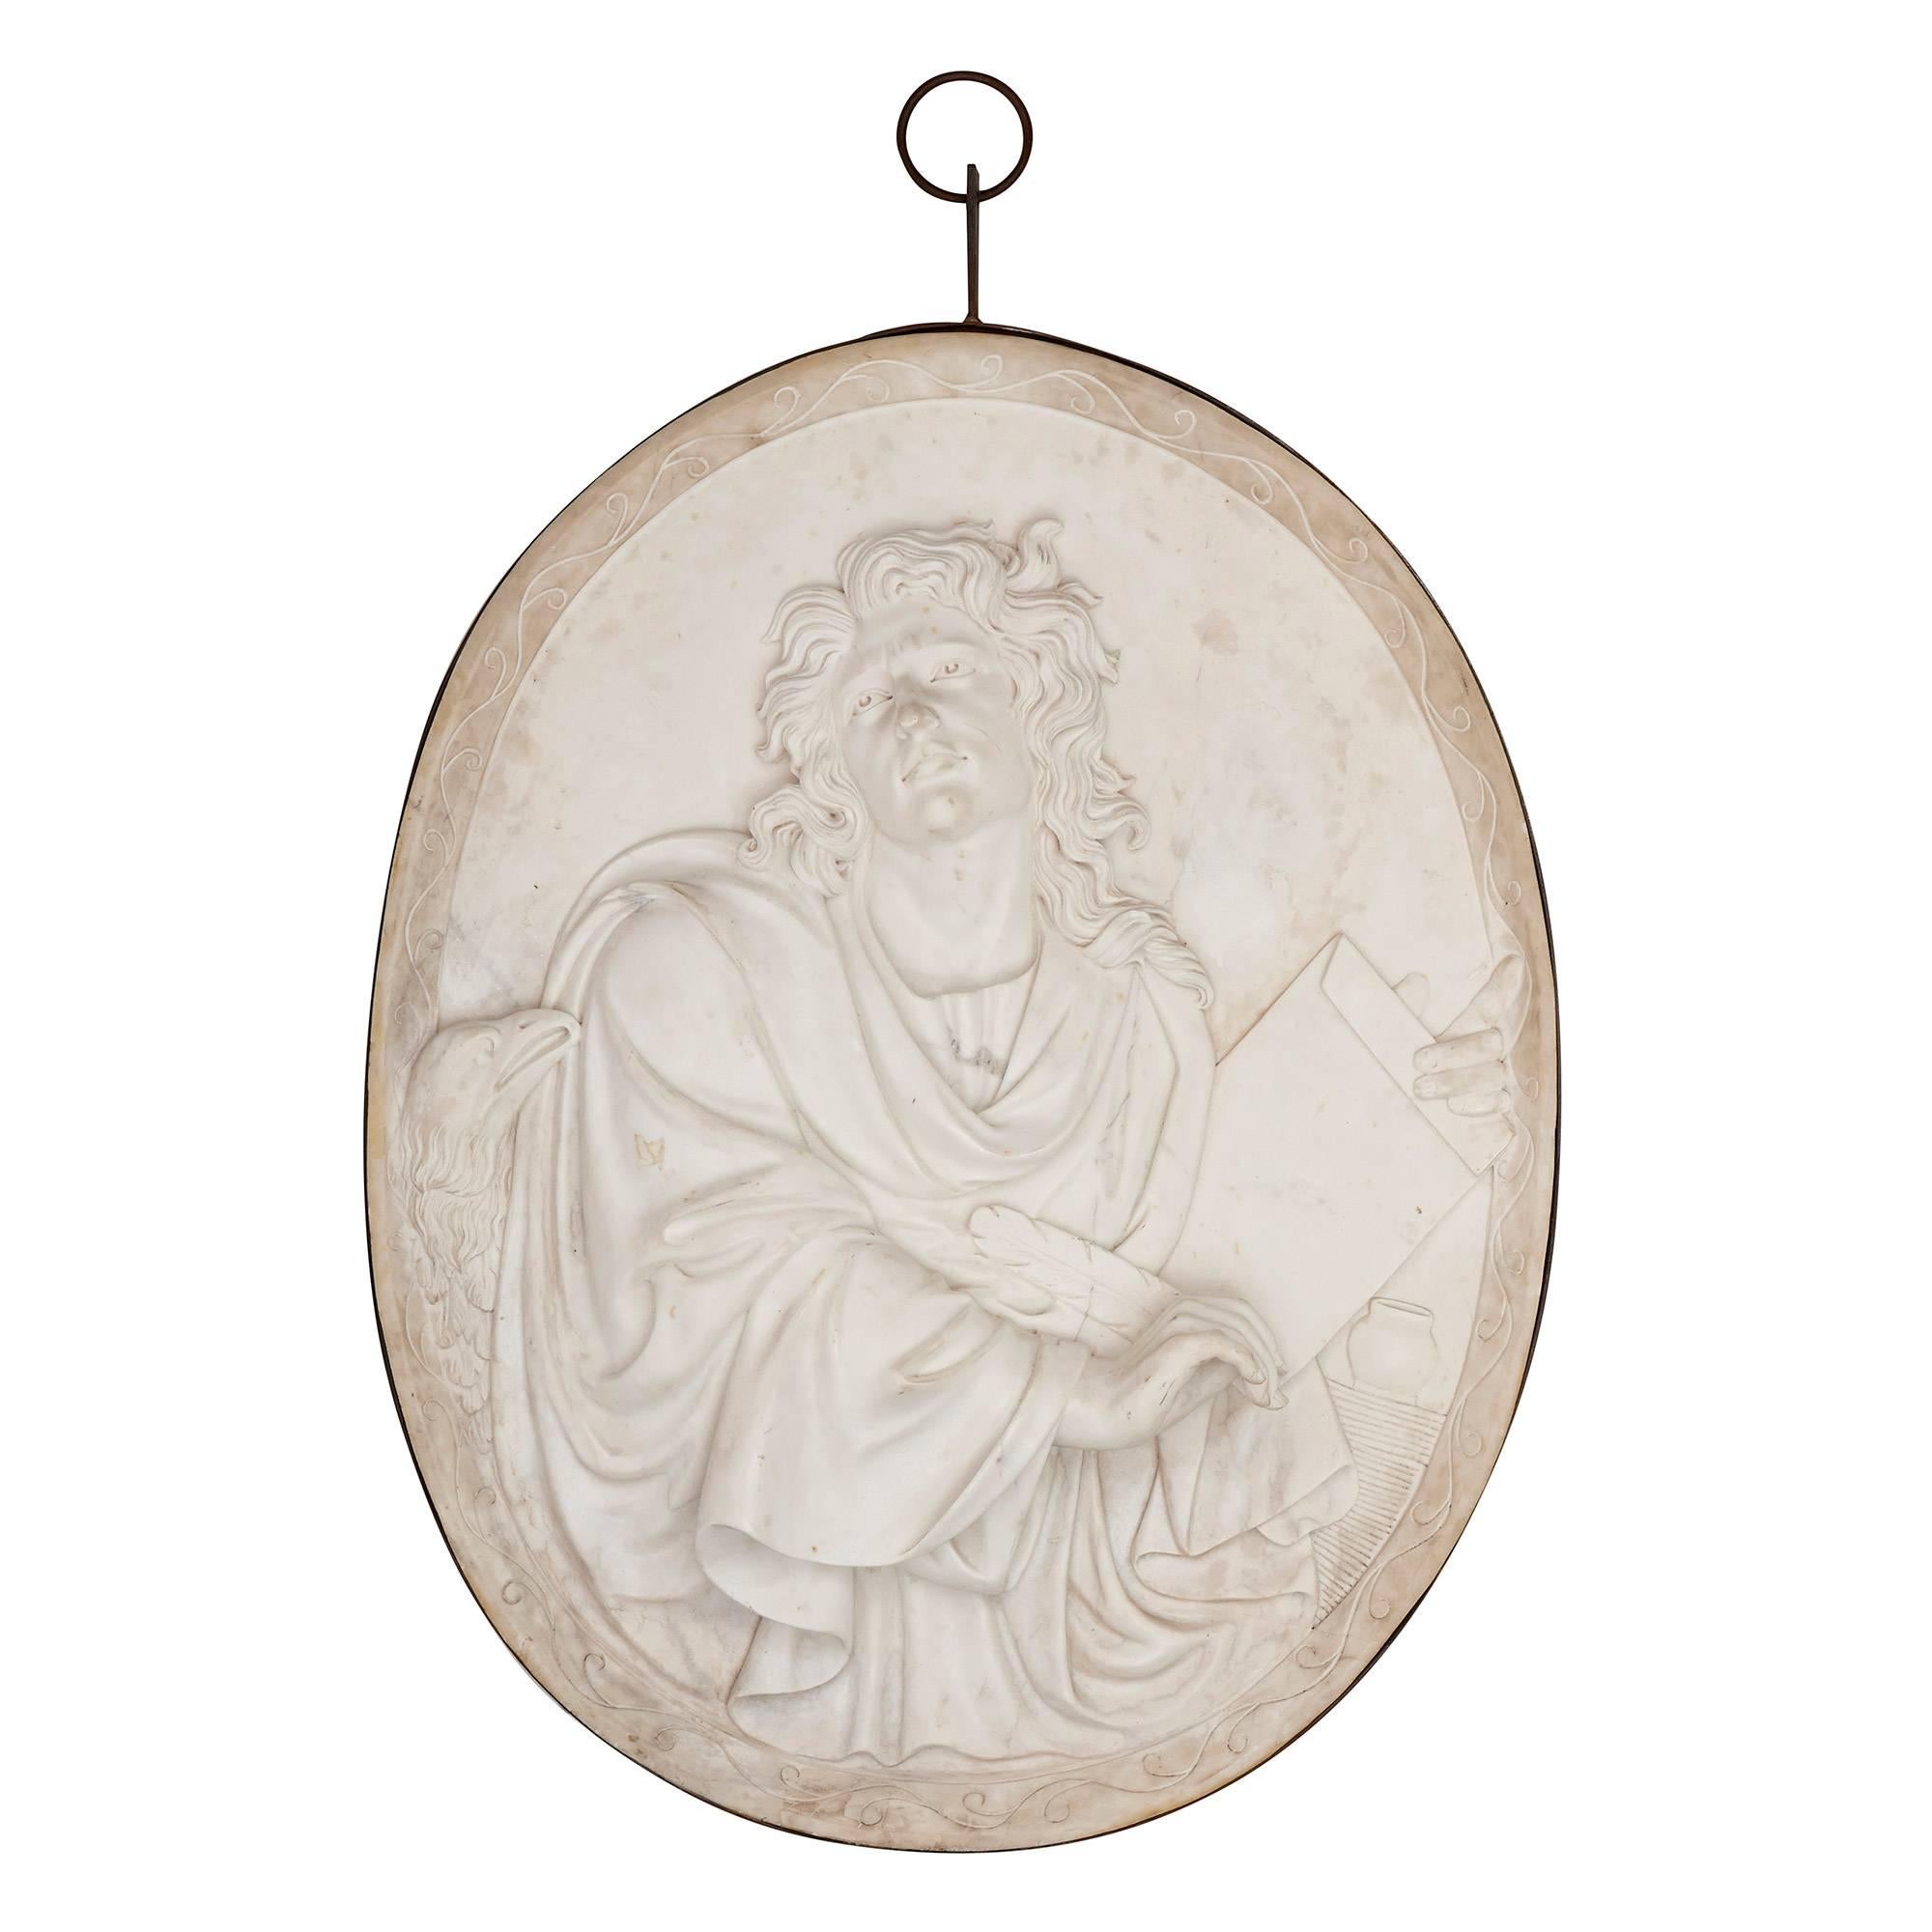 These exquisitely carved marble relief plaques, are notable for their large size and fine detailing, and were made after two famous plaques of the Baroque period, which can now be seen in the Louvre Museum, Paris. Both of the plaques - which likely